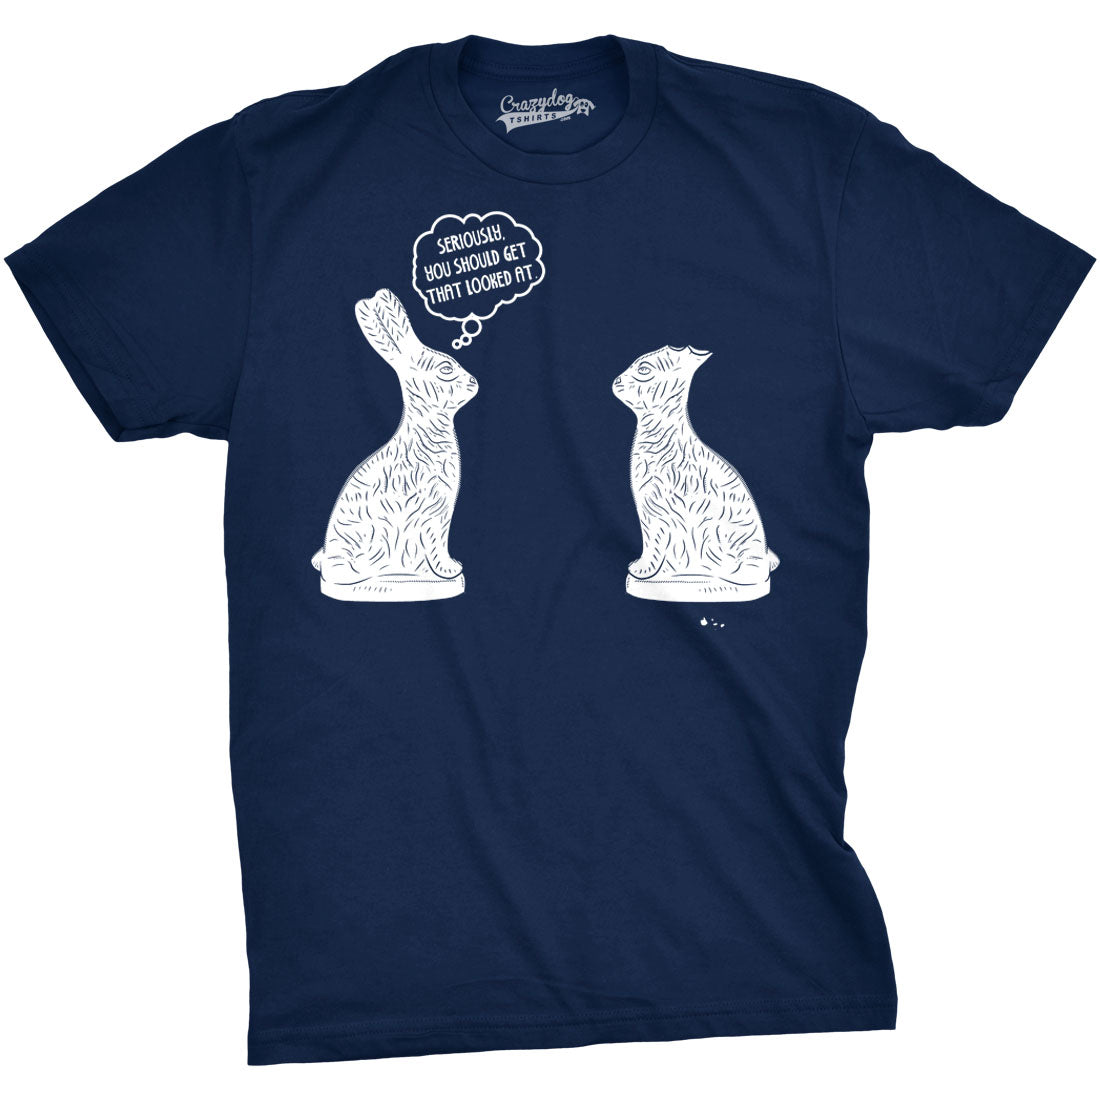 Funny Navy You Should Get That Looked At Mens T Shirt Nerdy Easter Tee